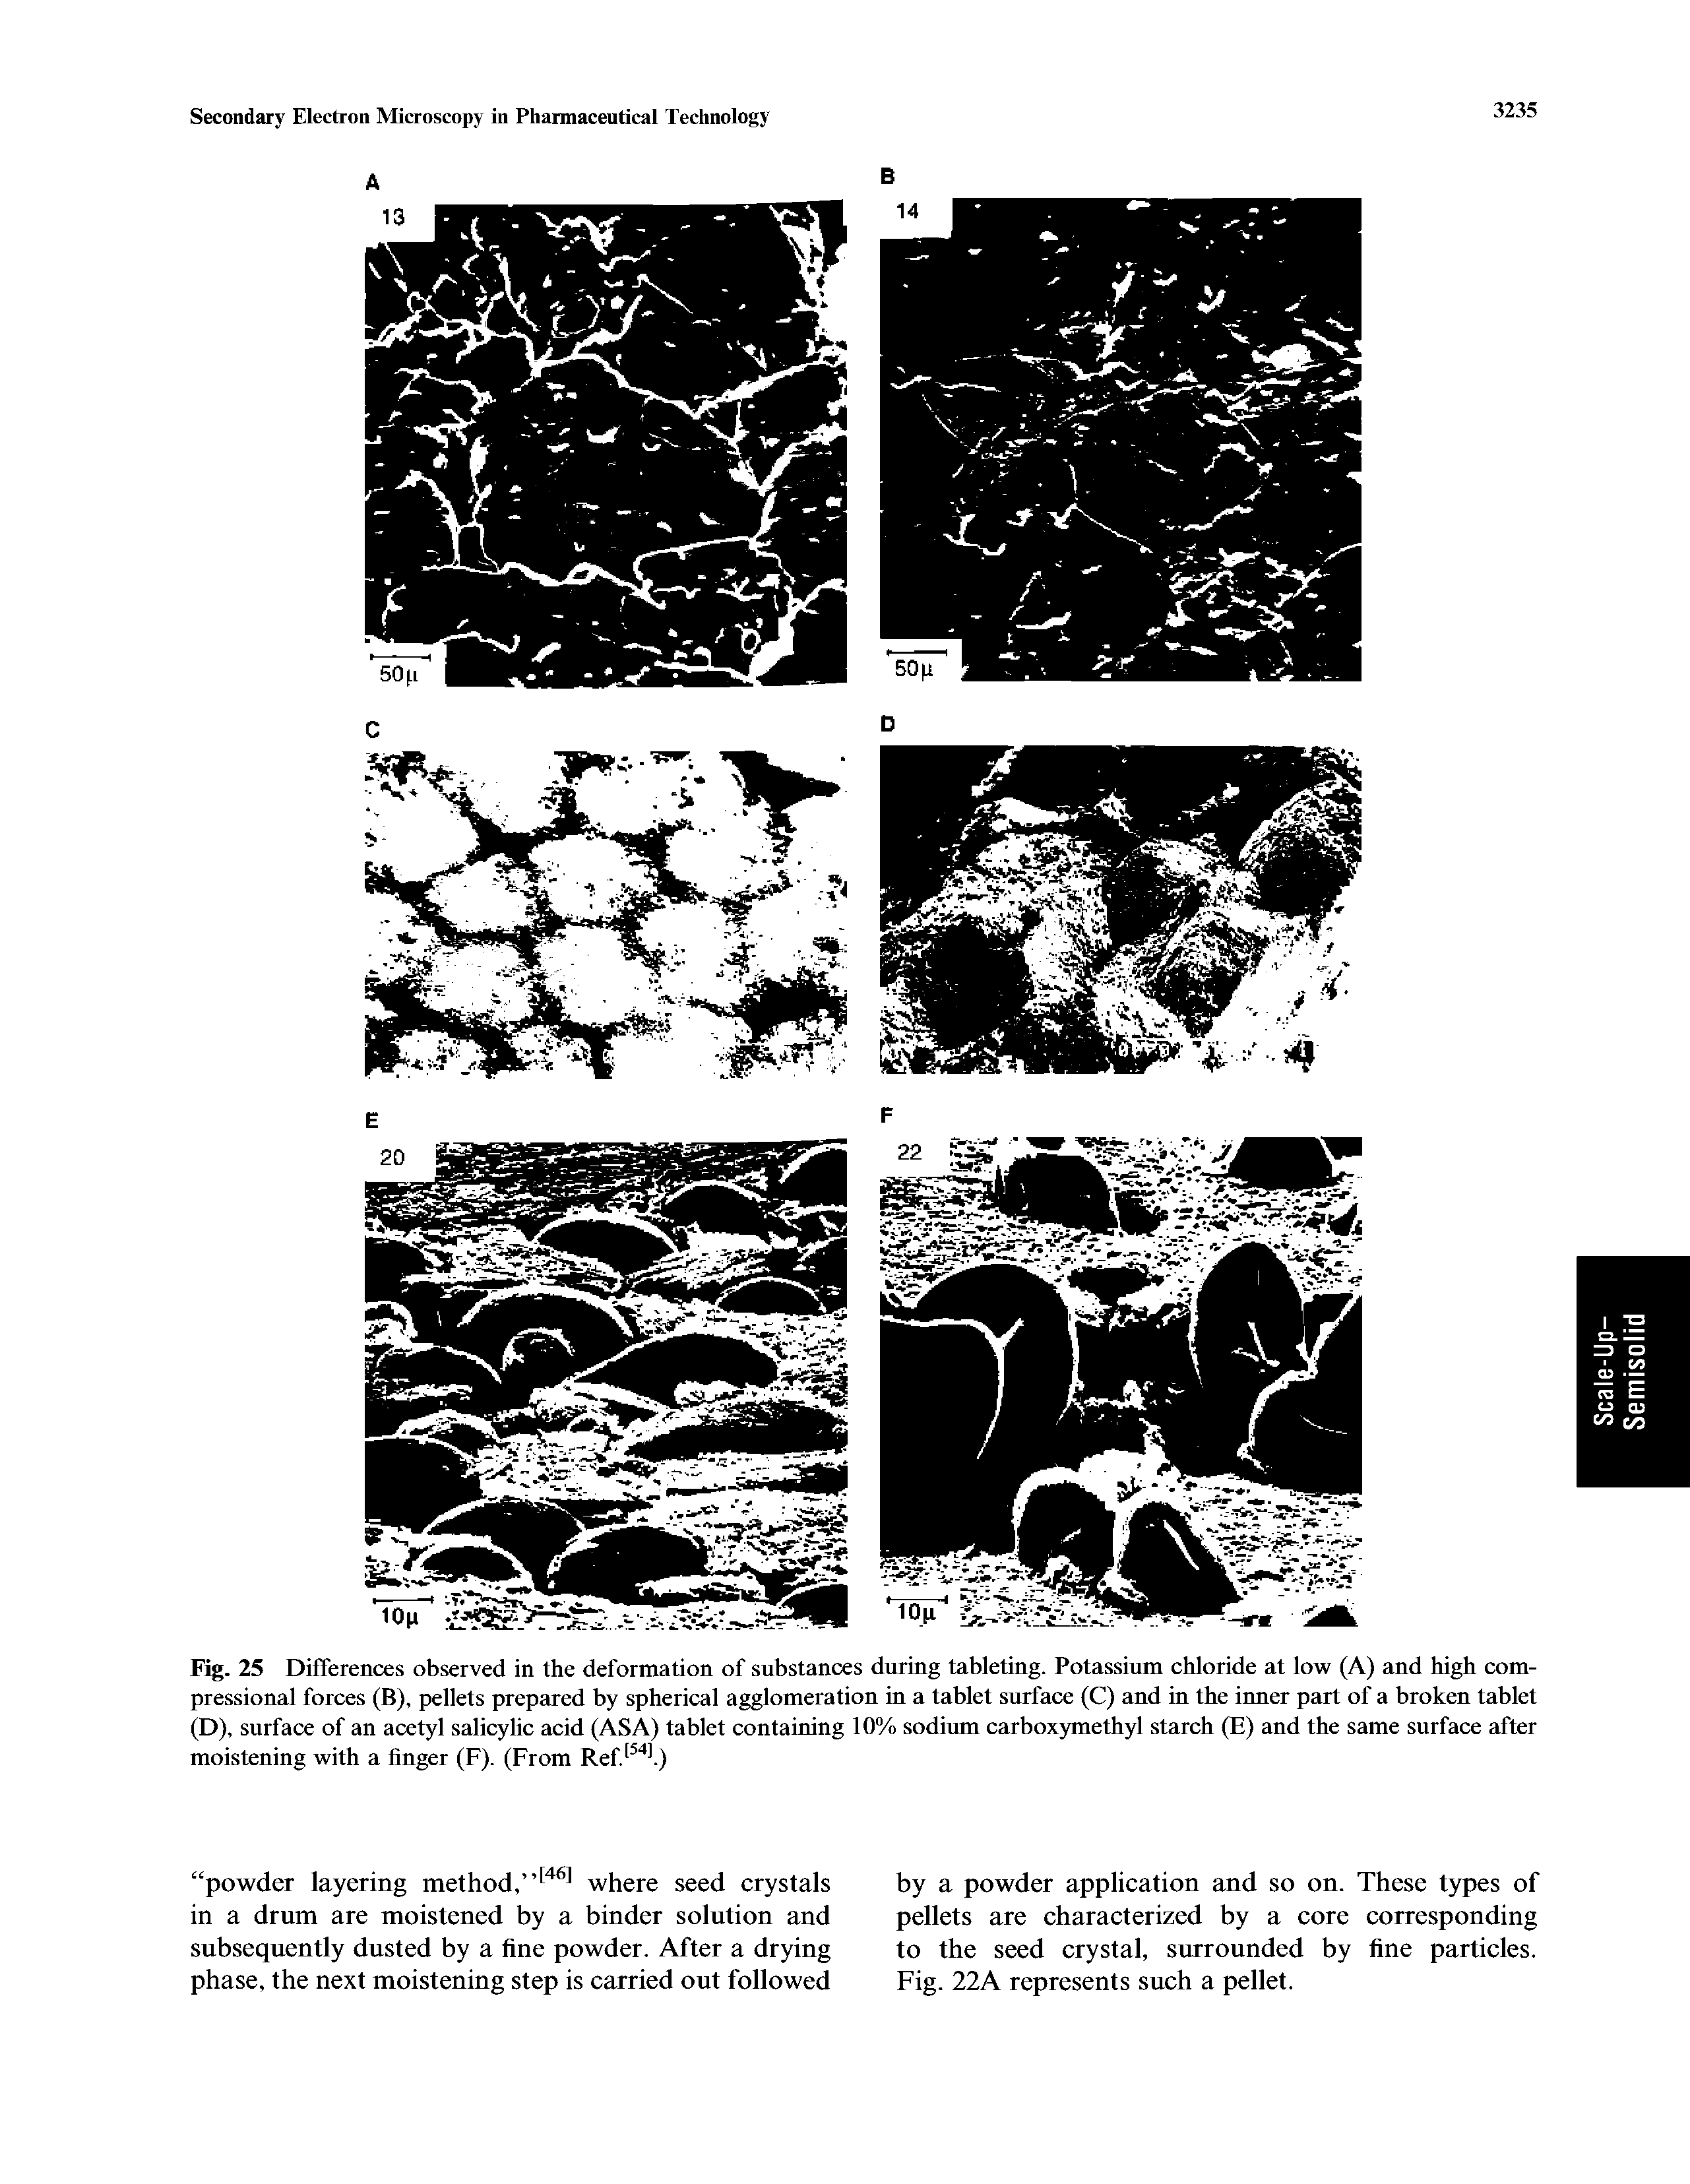 Fig. 25 Differences observed in the deformation of substances during tableting. Potassium chloride at low (A) and high com-pressional forces (B), pellets prepared by spherical agglomeration in a tablet surface (C) and in the inner part of a broken tablet (D), surface of an acetyl salicylic acid (ASA) tablet containing 10% sodium carbox5methyl starch (E) and the same surface after moistening with a finger (F). (From Ref...